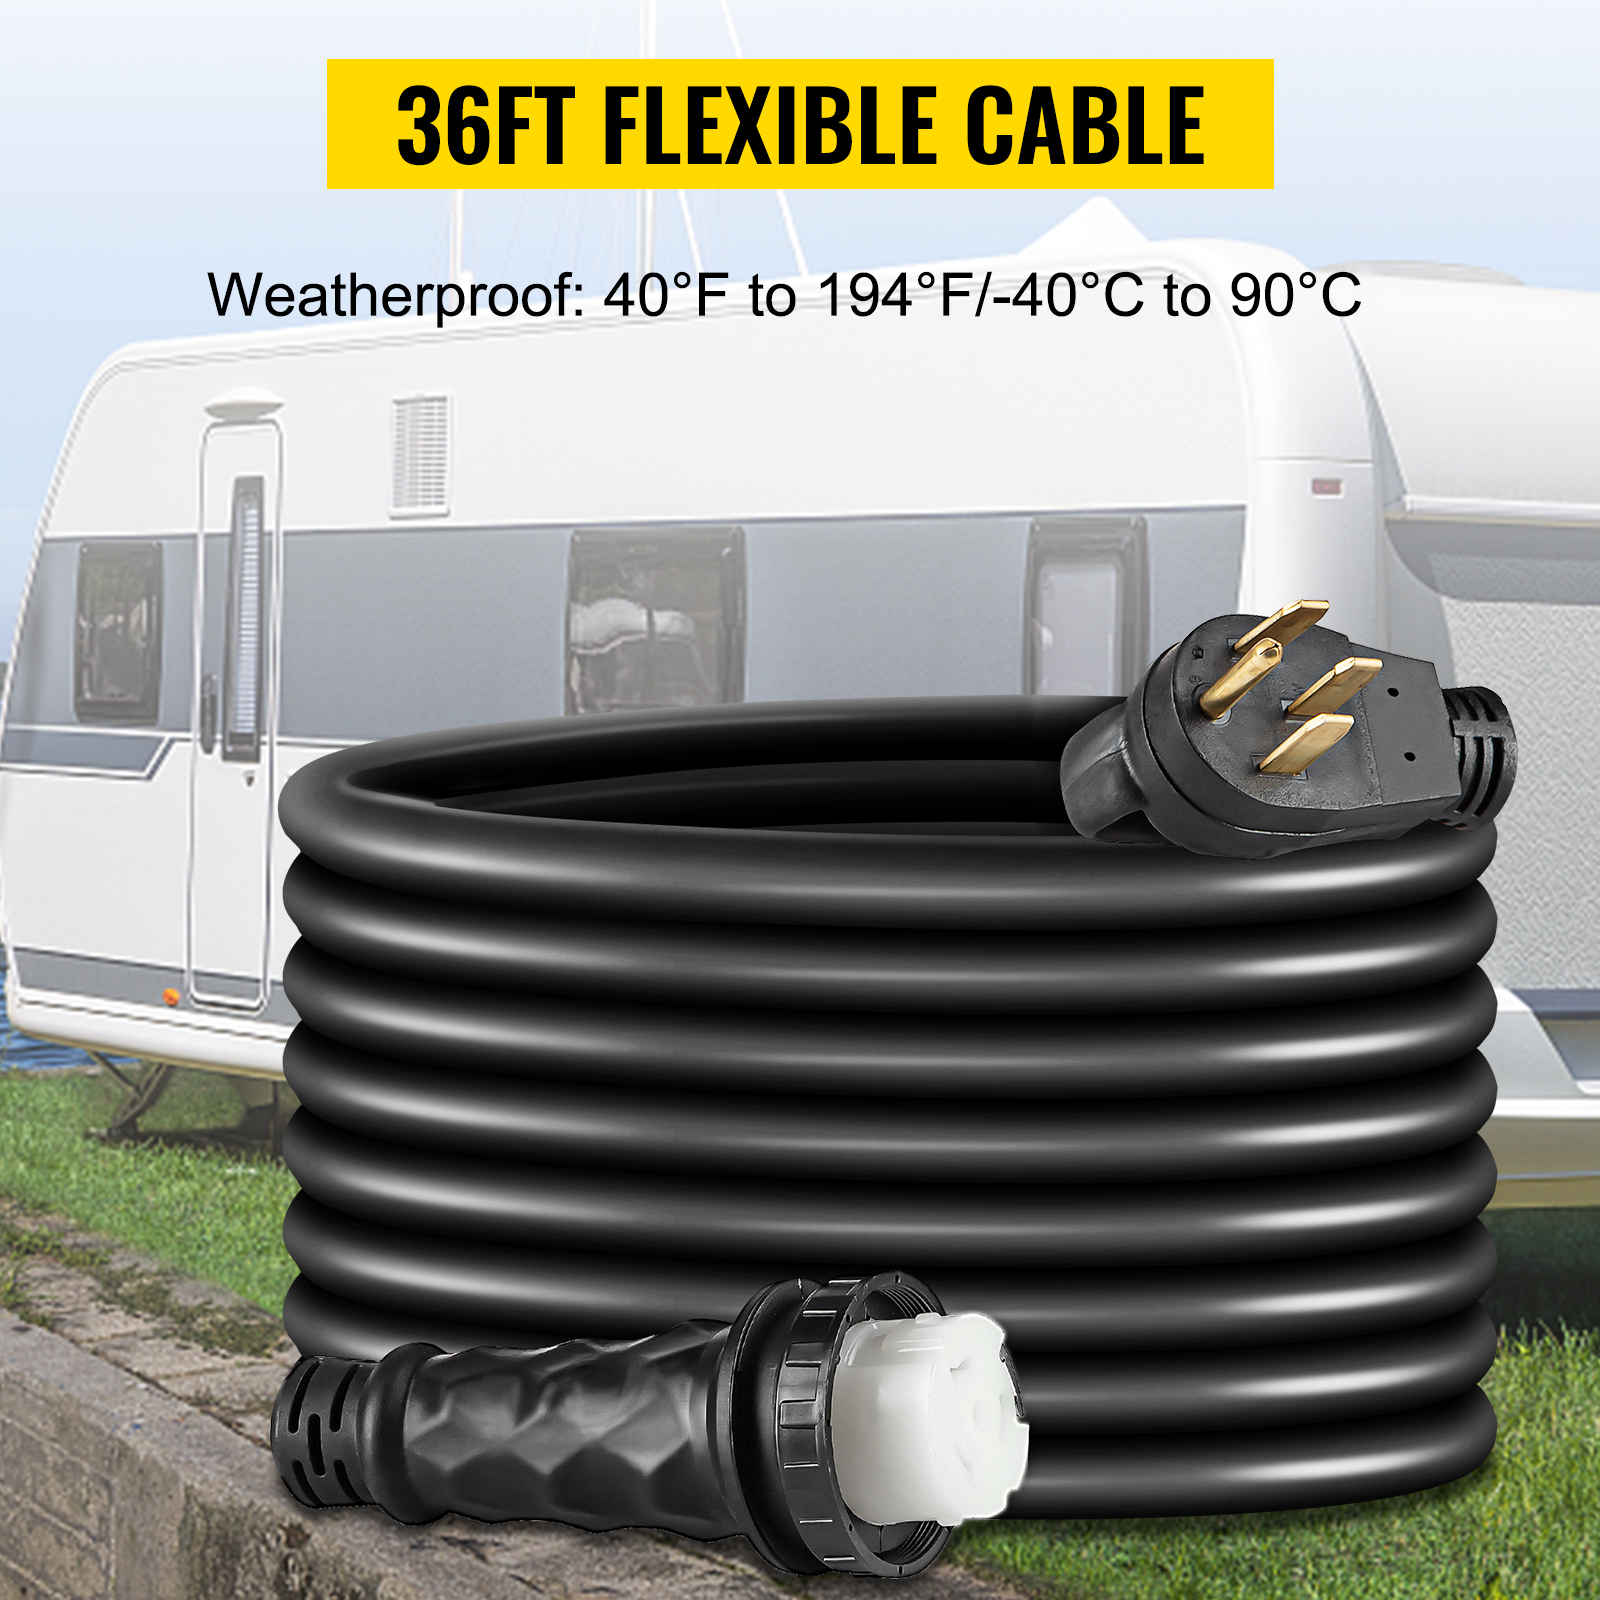 VEVOR RV Shore Power Extension Cord 36FT 50 AMP Weatherproof Heavy Duty 6/3  + 8/1 STW Twist Lock Cord 50 Amp RV Replacement Cord UL and CSA Approved  W/Molded Connector and Patented Handle